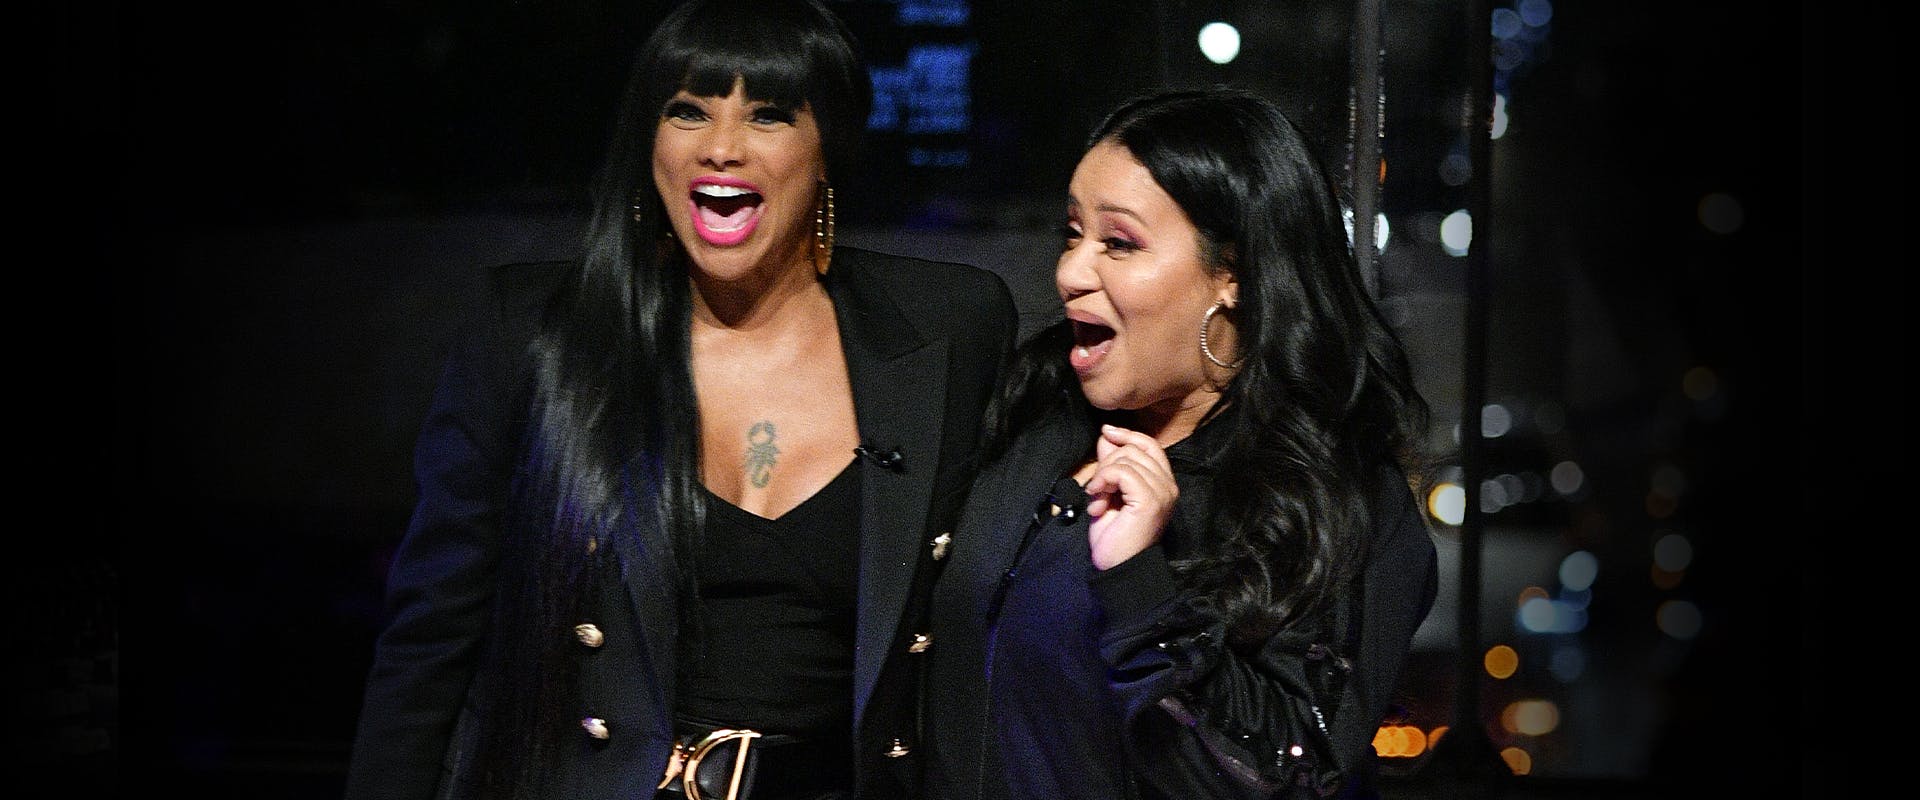 Sandra Denton and Cheryl James of Salt-N-Pepa speak onstage during the 2019 A+E Networks Upfront at Jazz at Lincoln Center on March 27, 2019 in New York City.